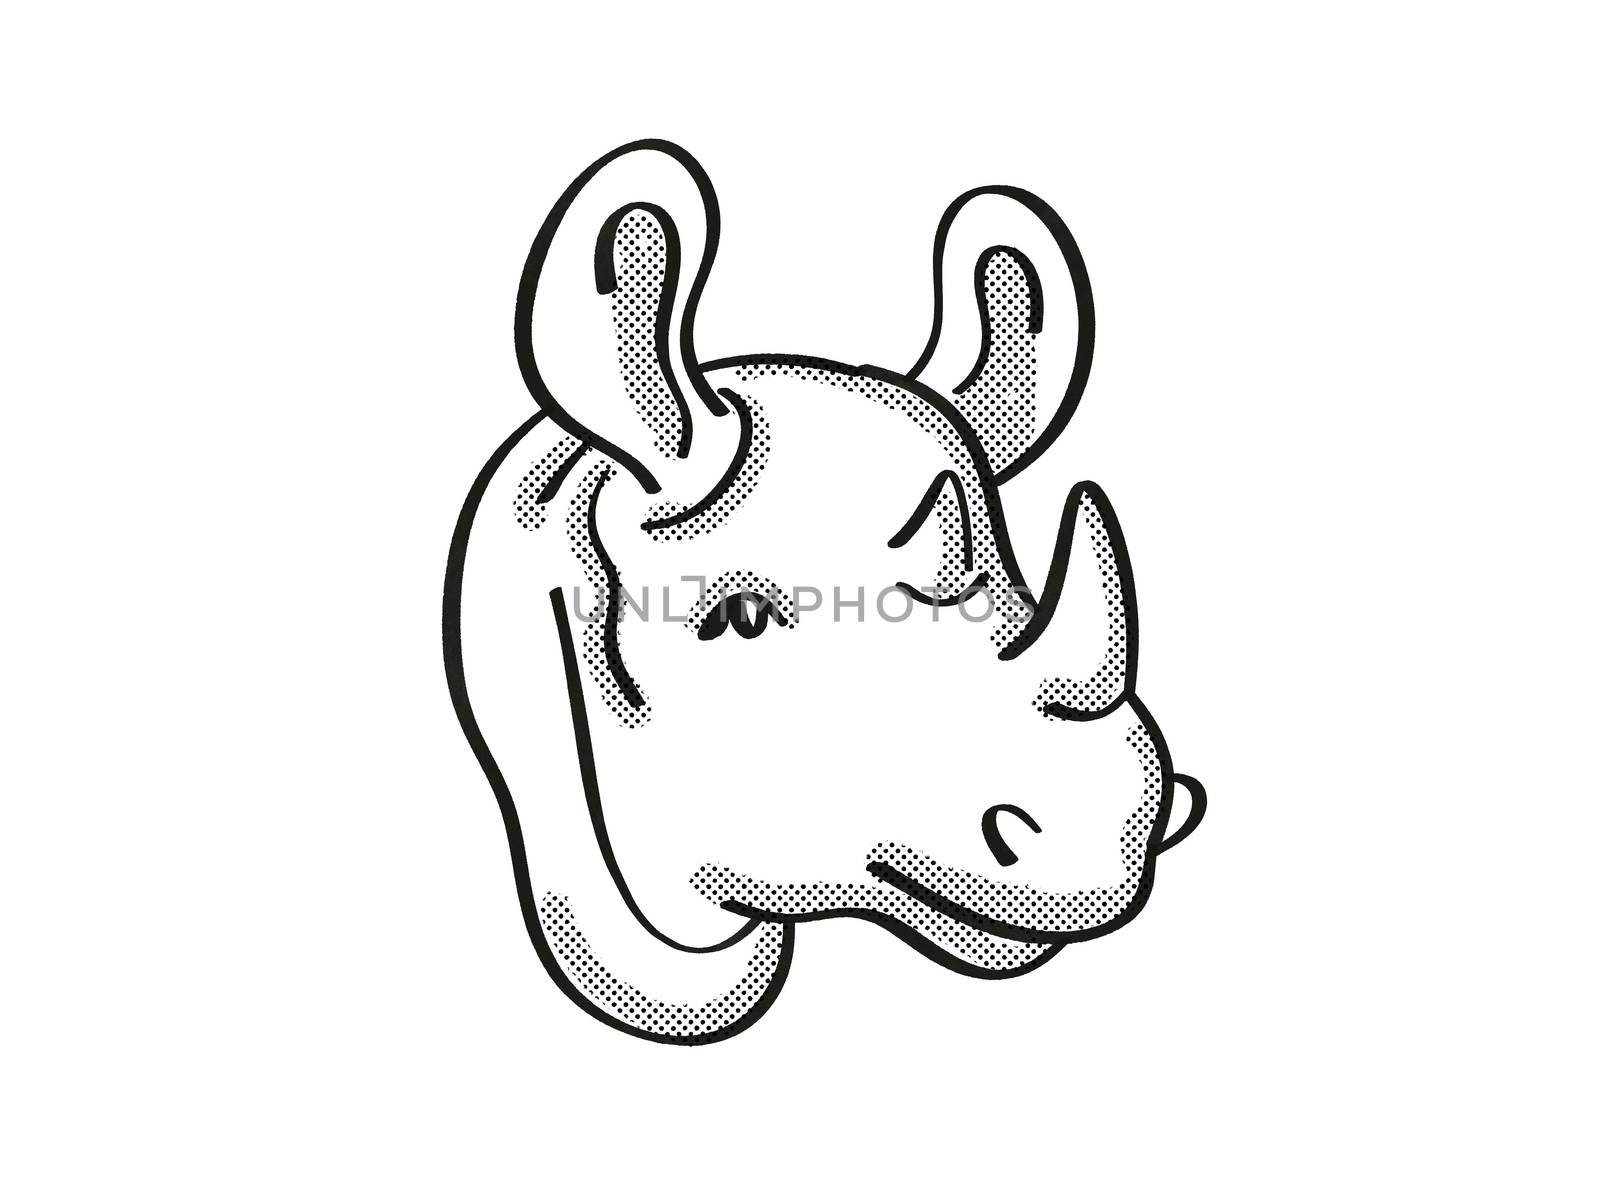 Retro cartoon mono line style drawing of head of a Black rhinoceros, an endangered wildlife species on isolated white background done in black and white.